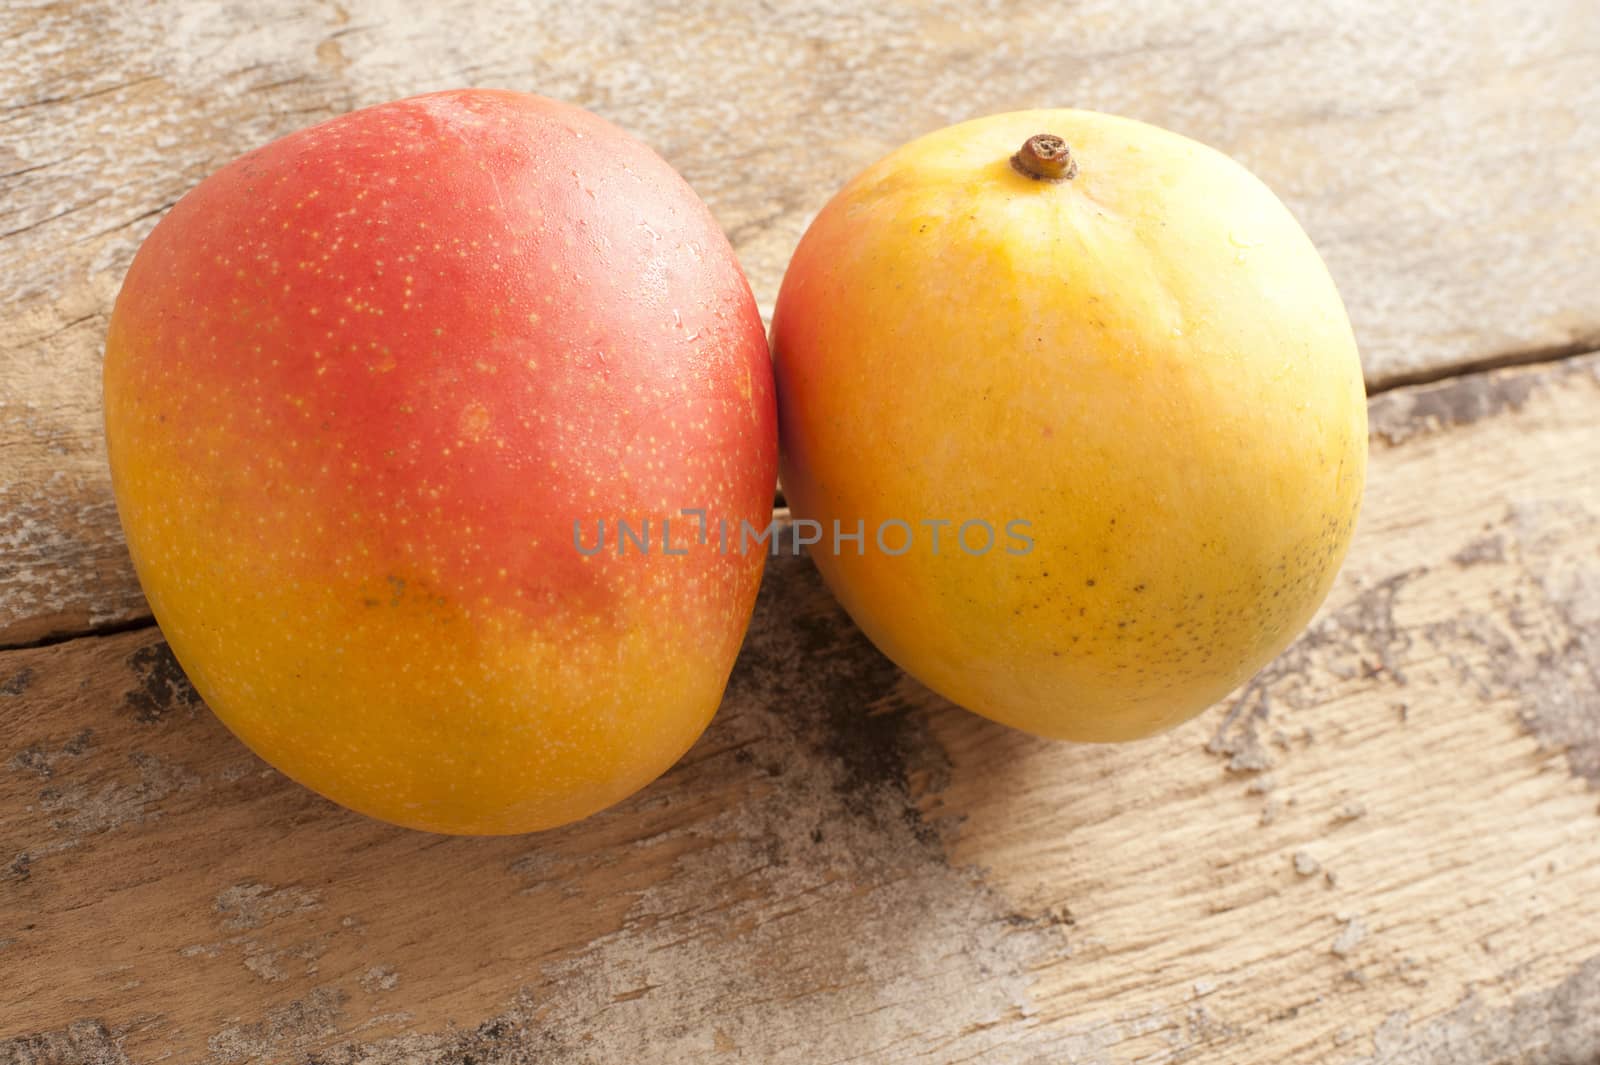 Two fresh whole sweet tropical mangoes by stockarch